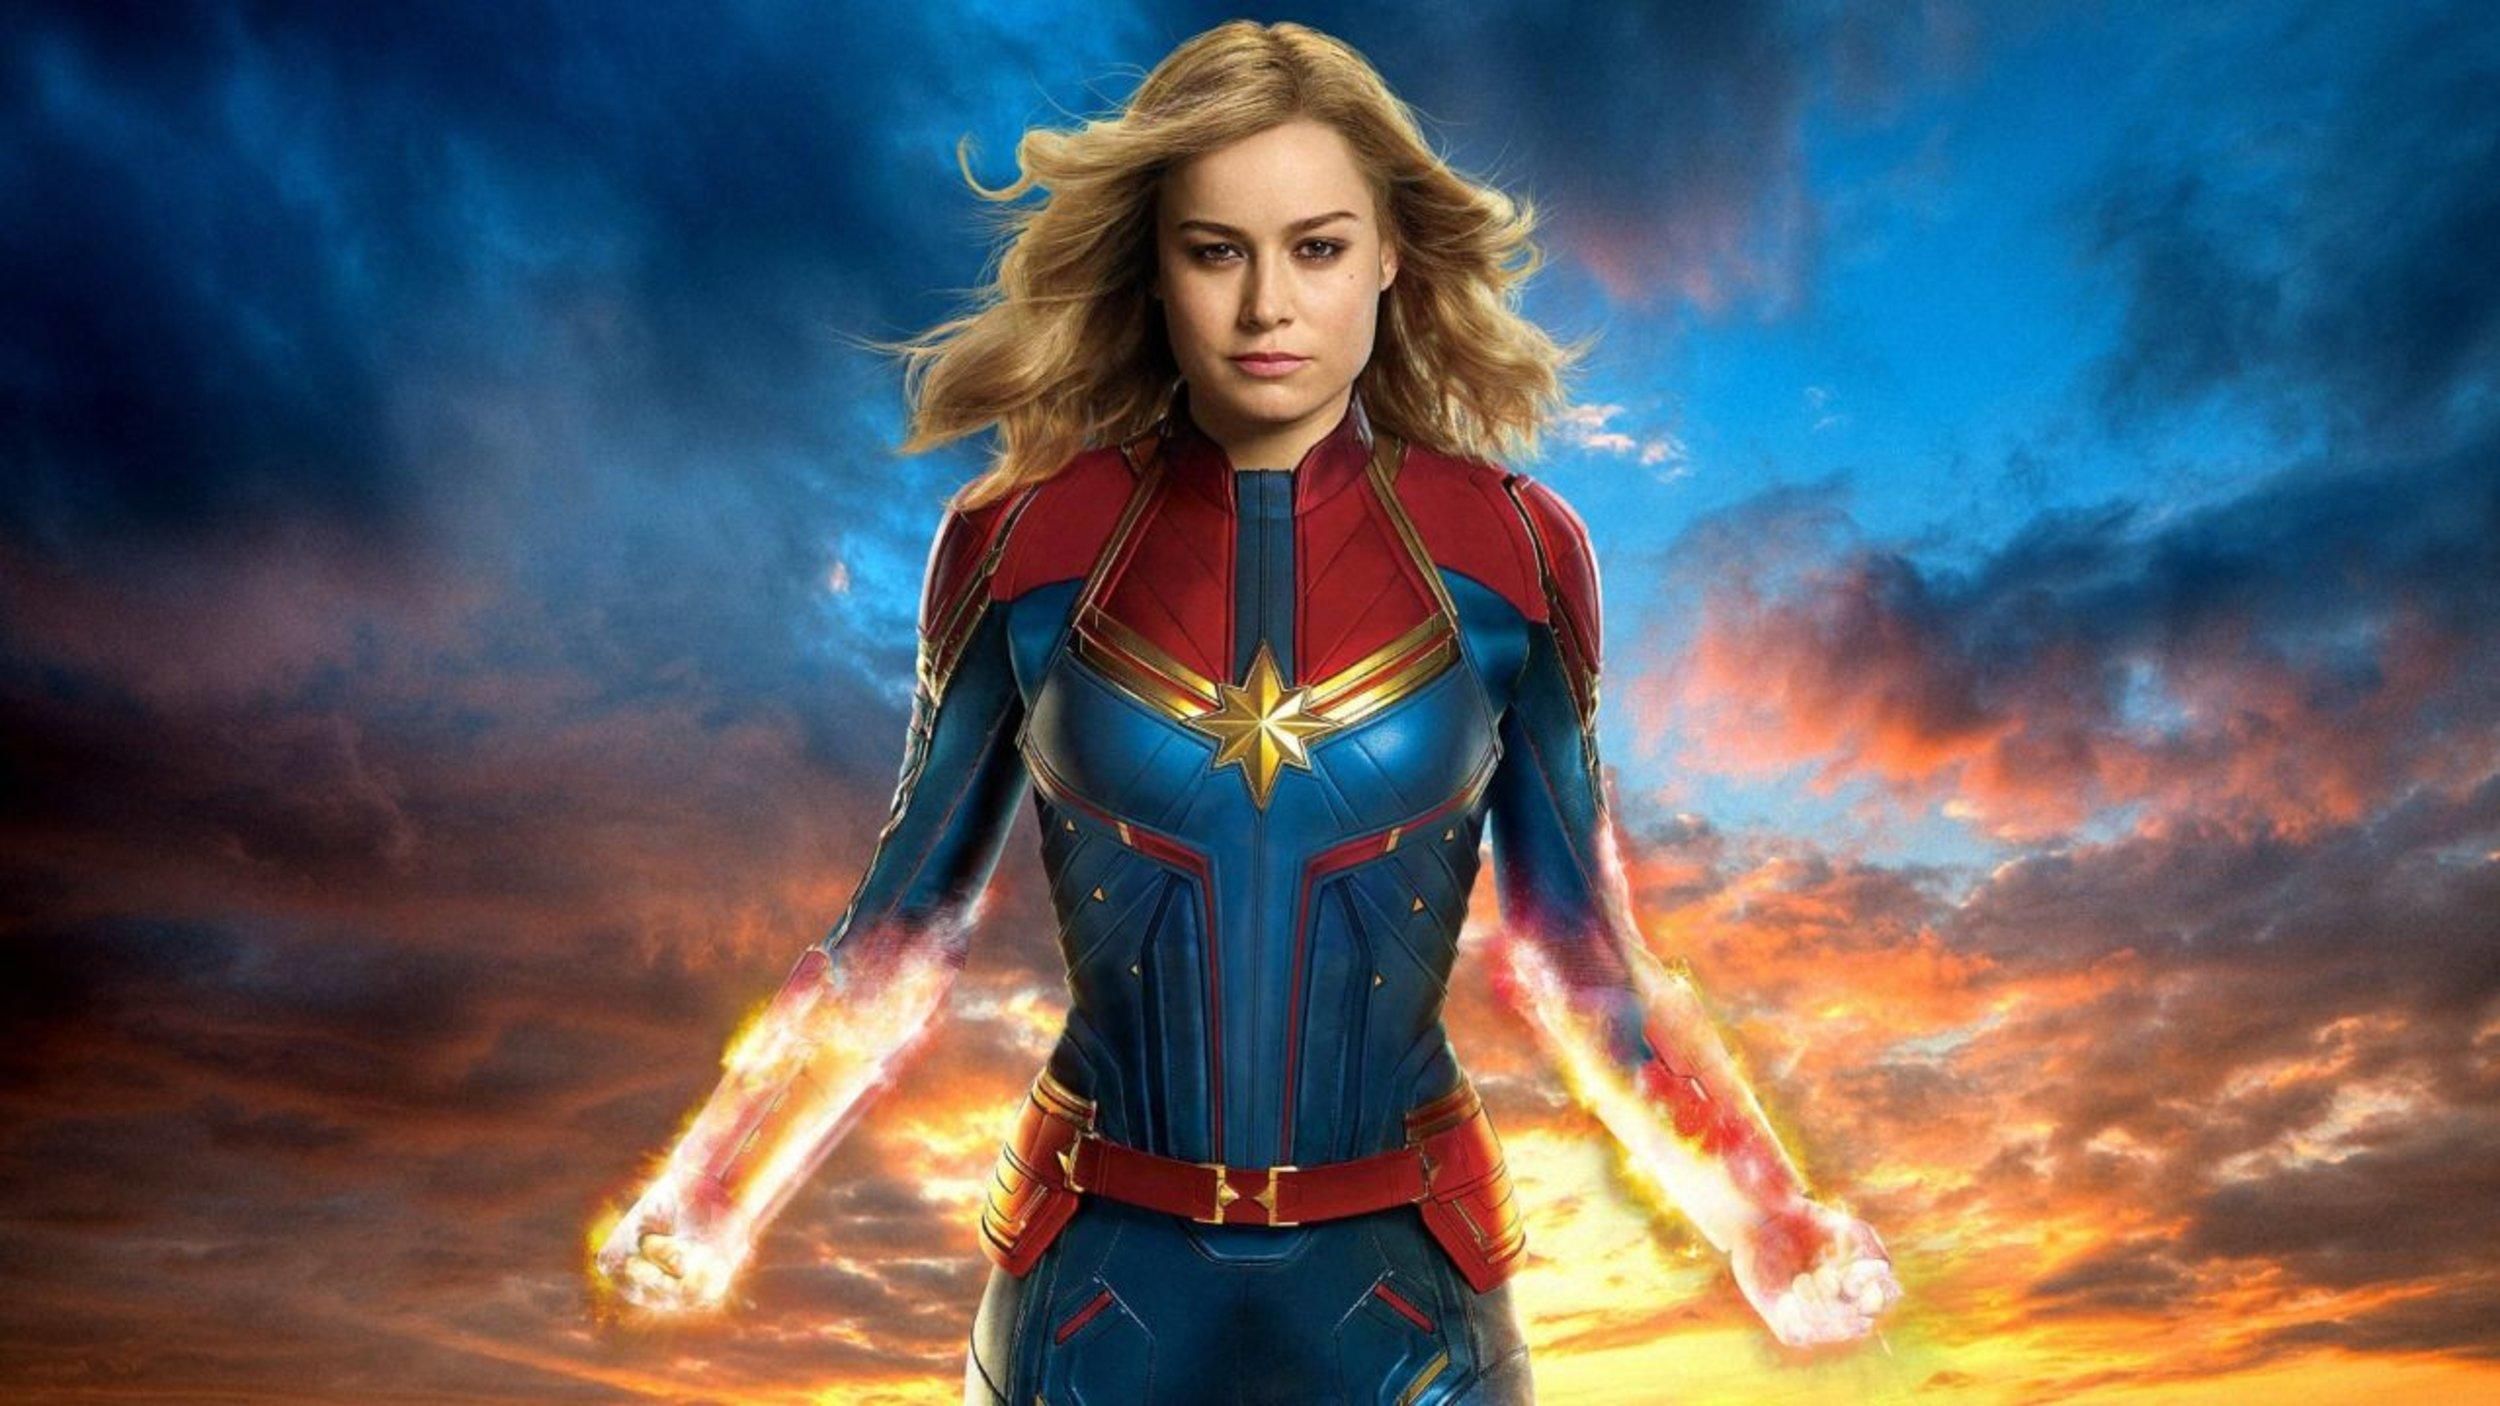 Captain Marvel sets a new box office record - Movie & Show News